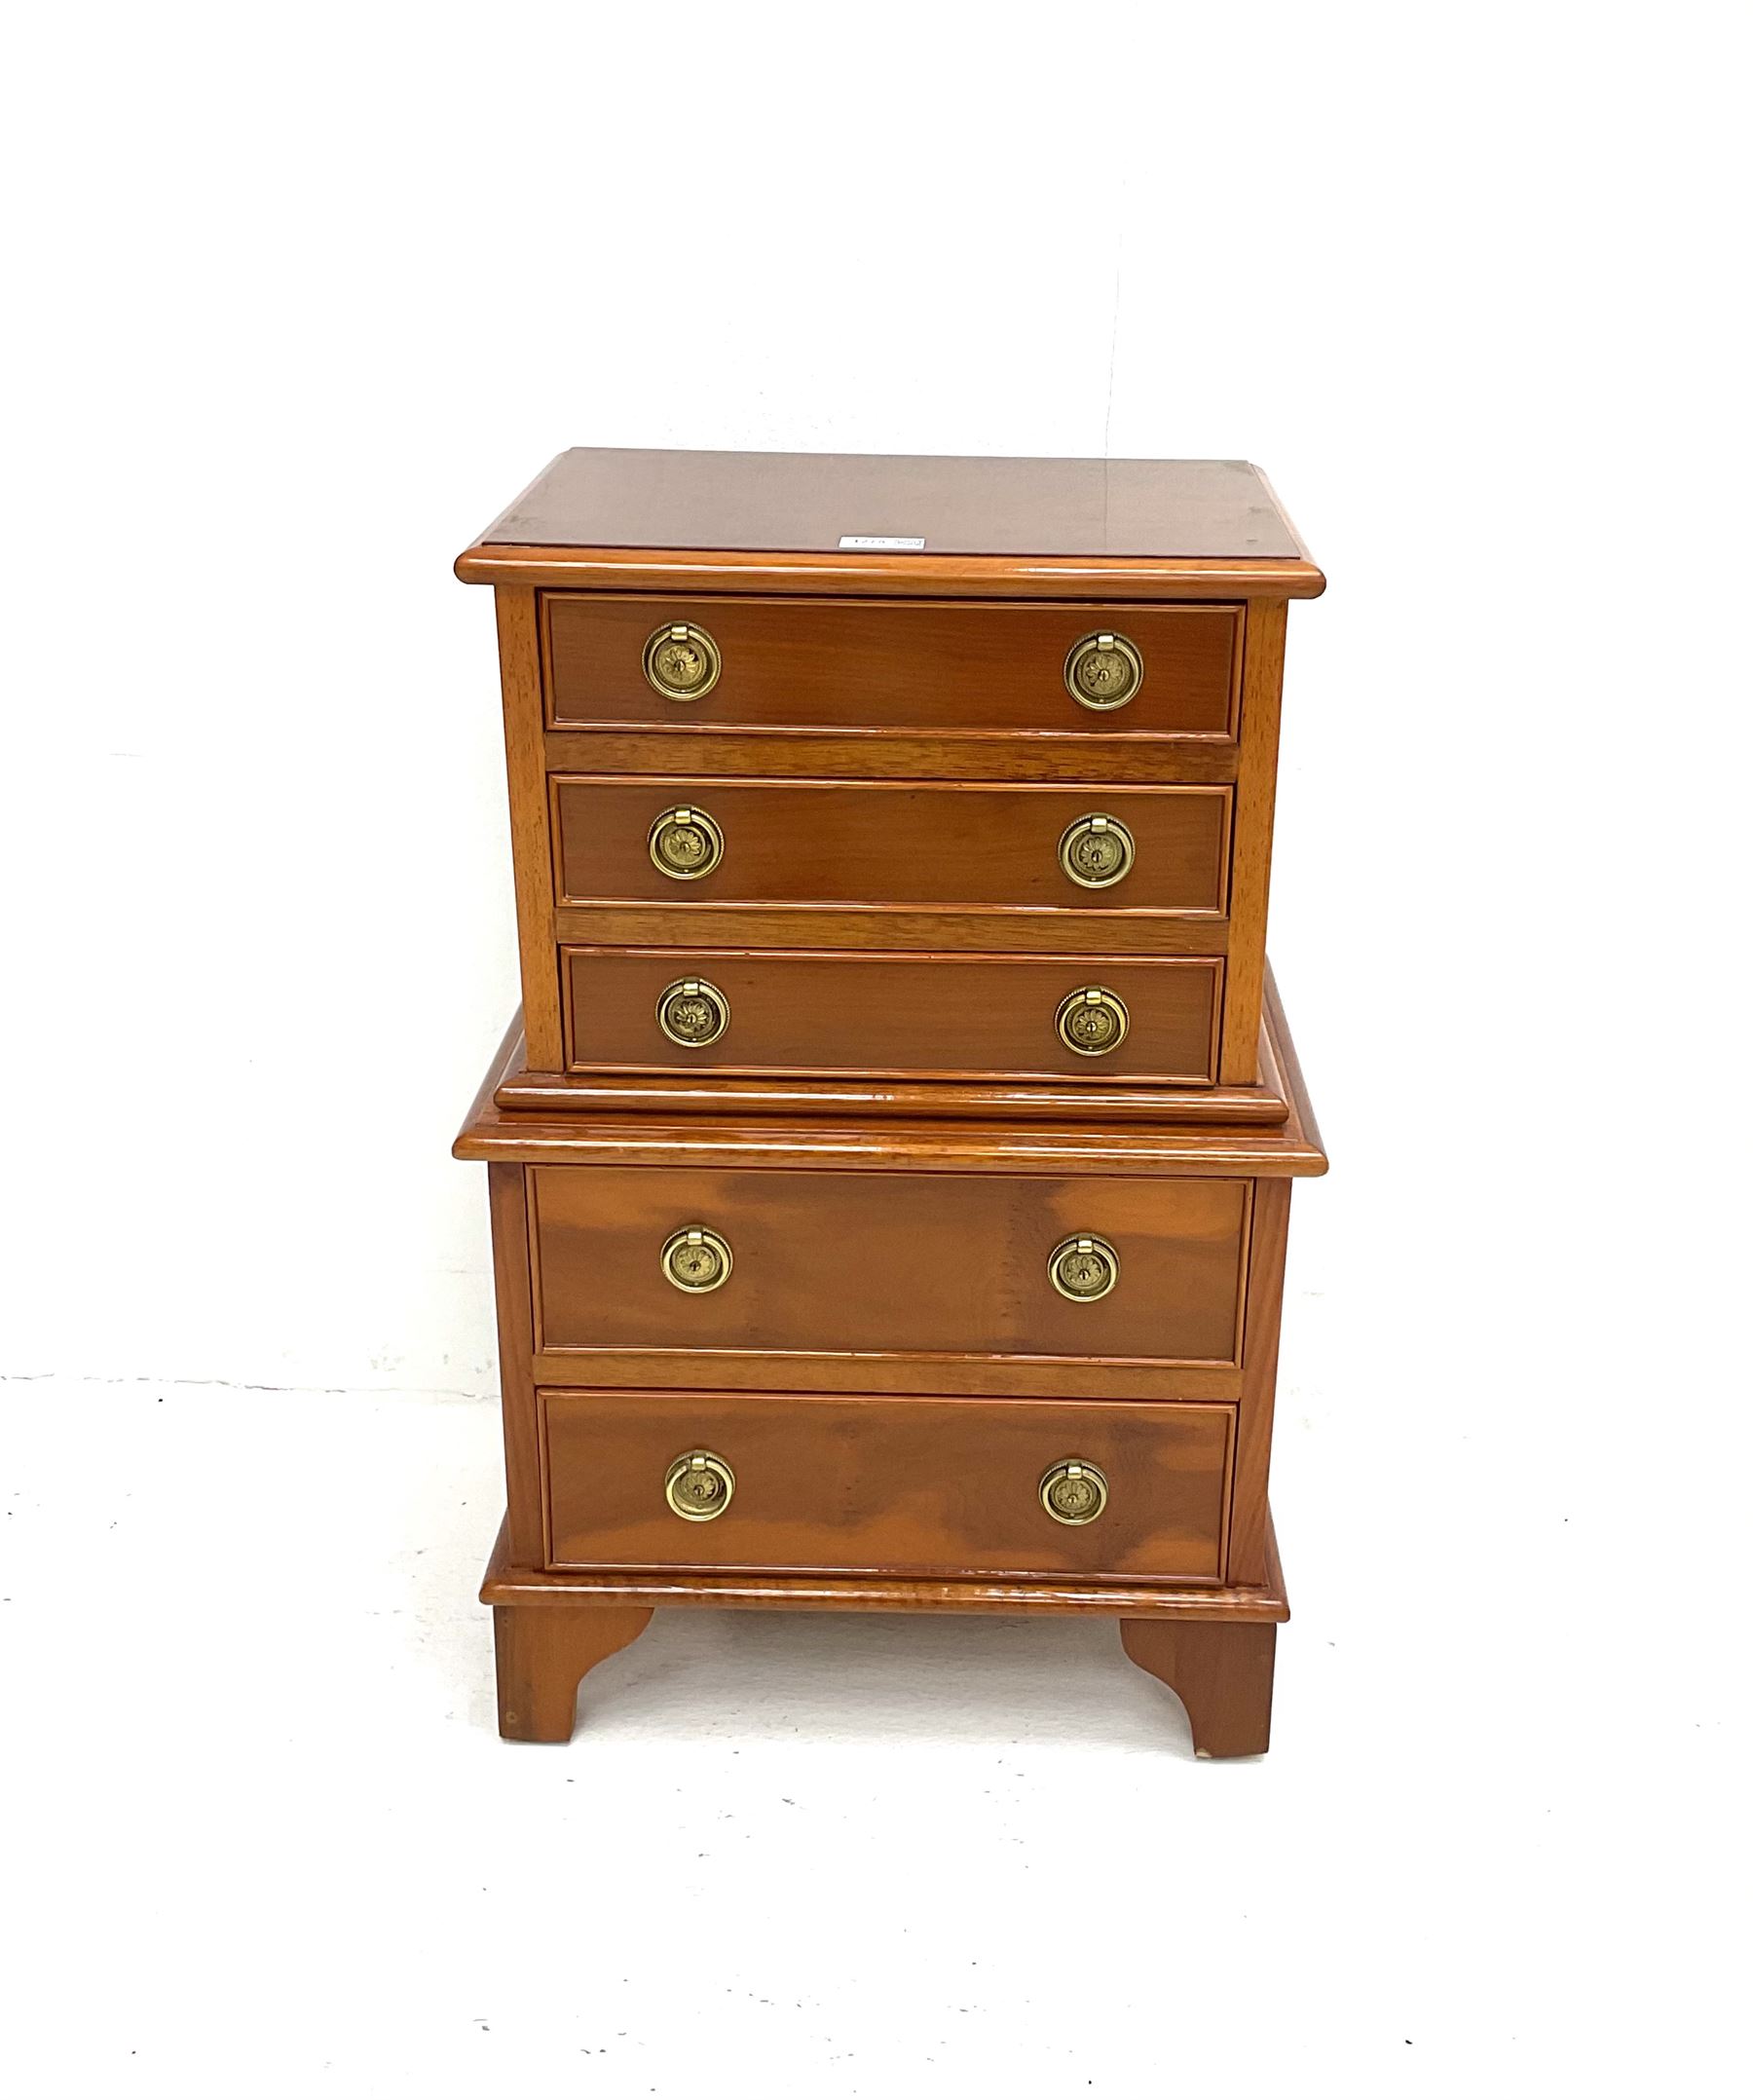 Dwarf chest of drawers - Image 2 of 3